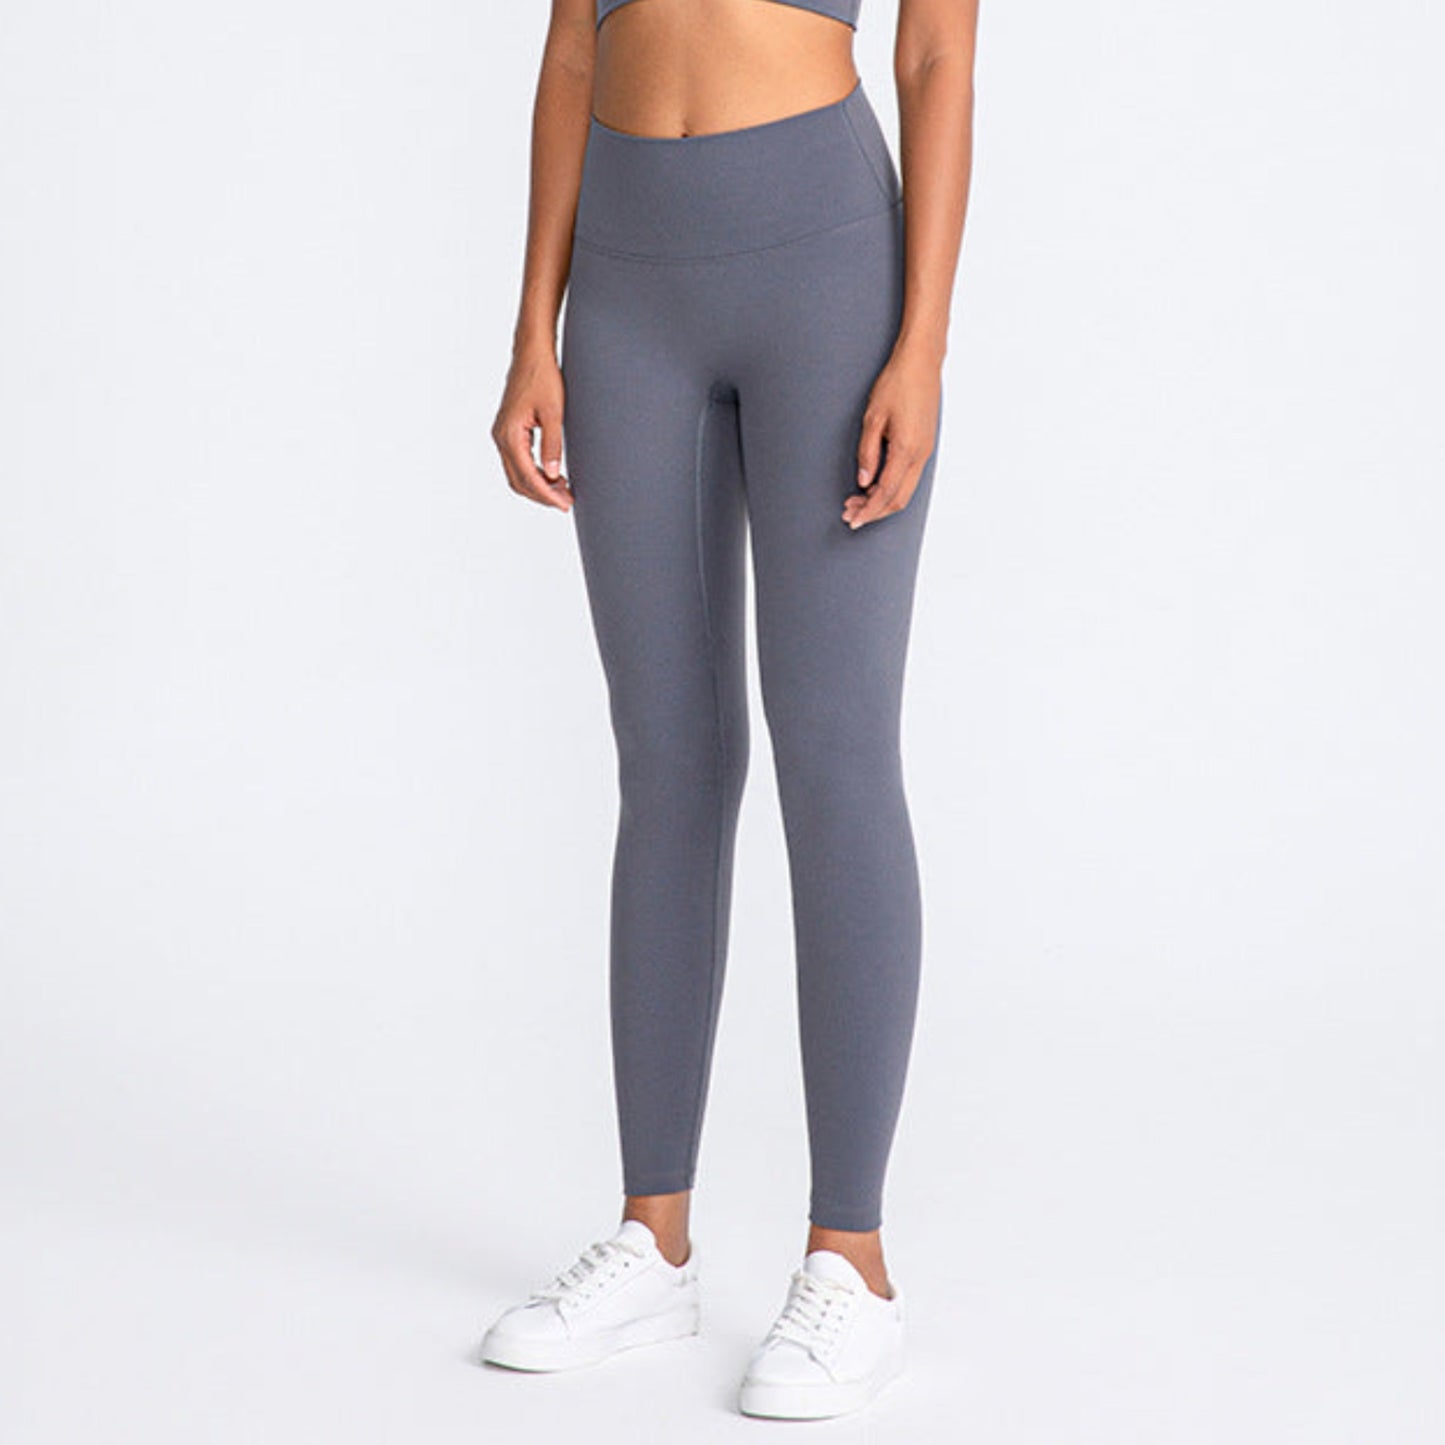 ASH GREY, HIGH RISE AND SQUAT PROOF LEGGINGS WORN BY MODEL ON A WHITE BACKGROUND